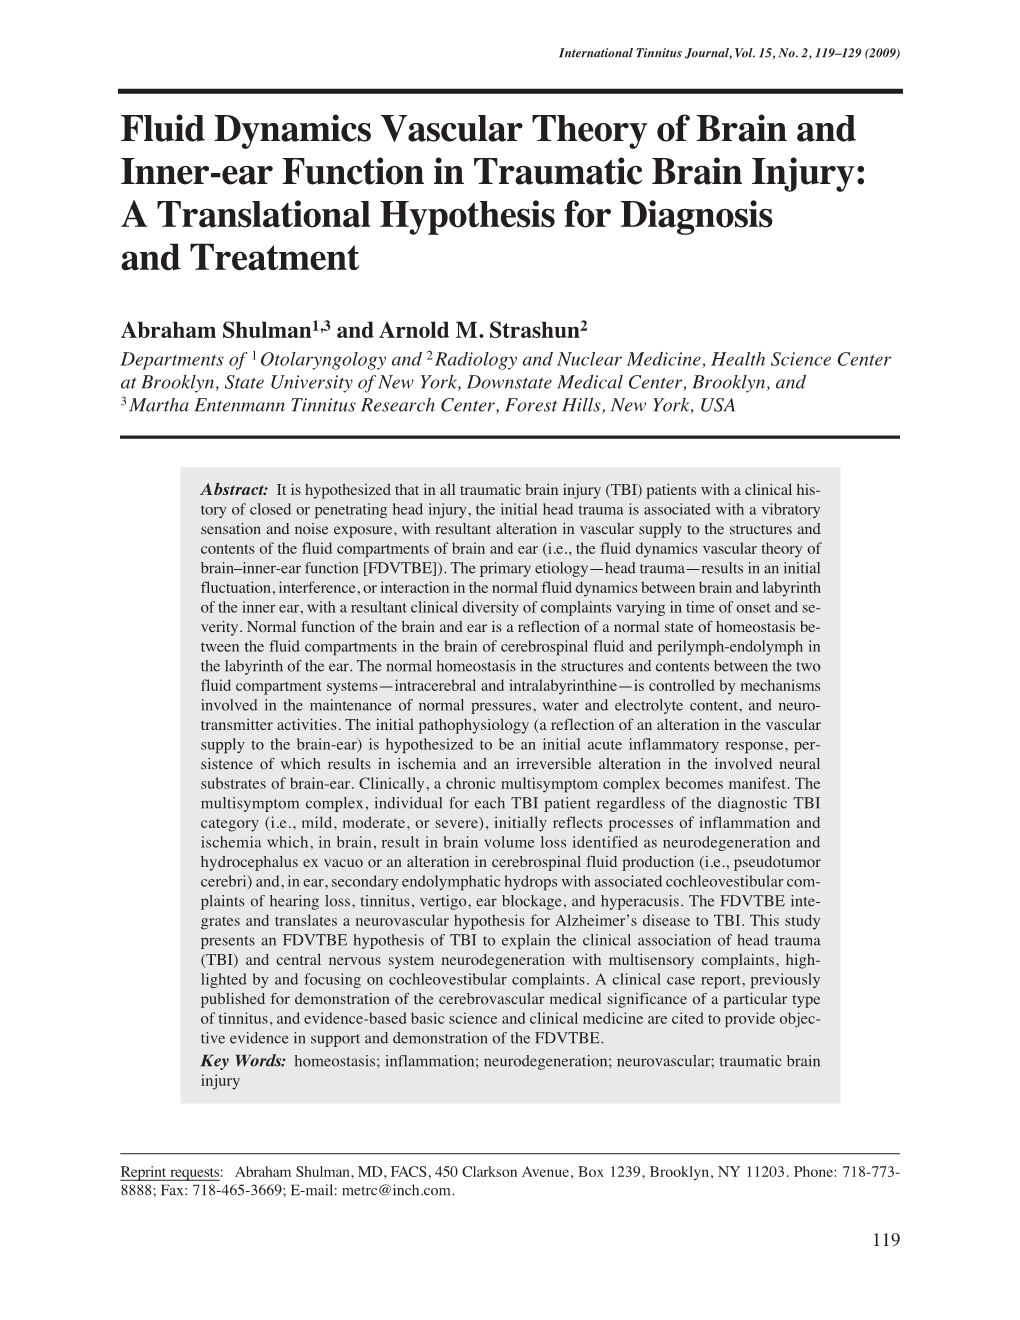 Fluid Dynamics Vascular Theory of Brain and Inner-Ear Function in Traumatic Brain Injury: a Translational Hypothesis for Diagnosis and Treatment